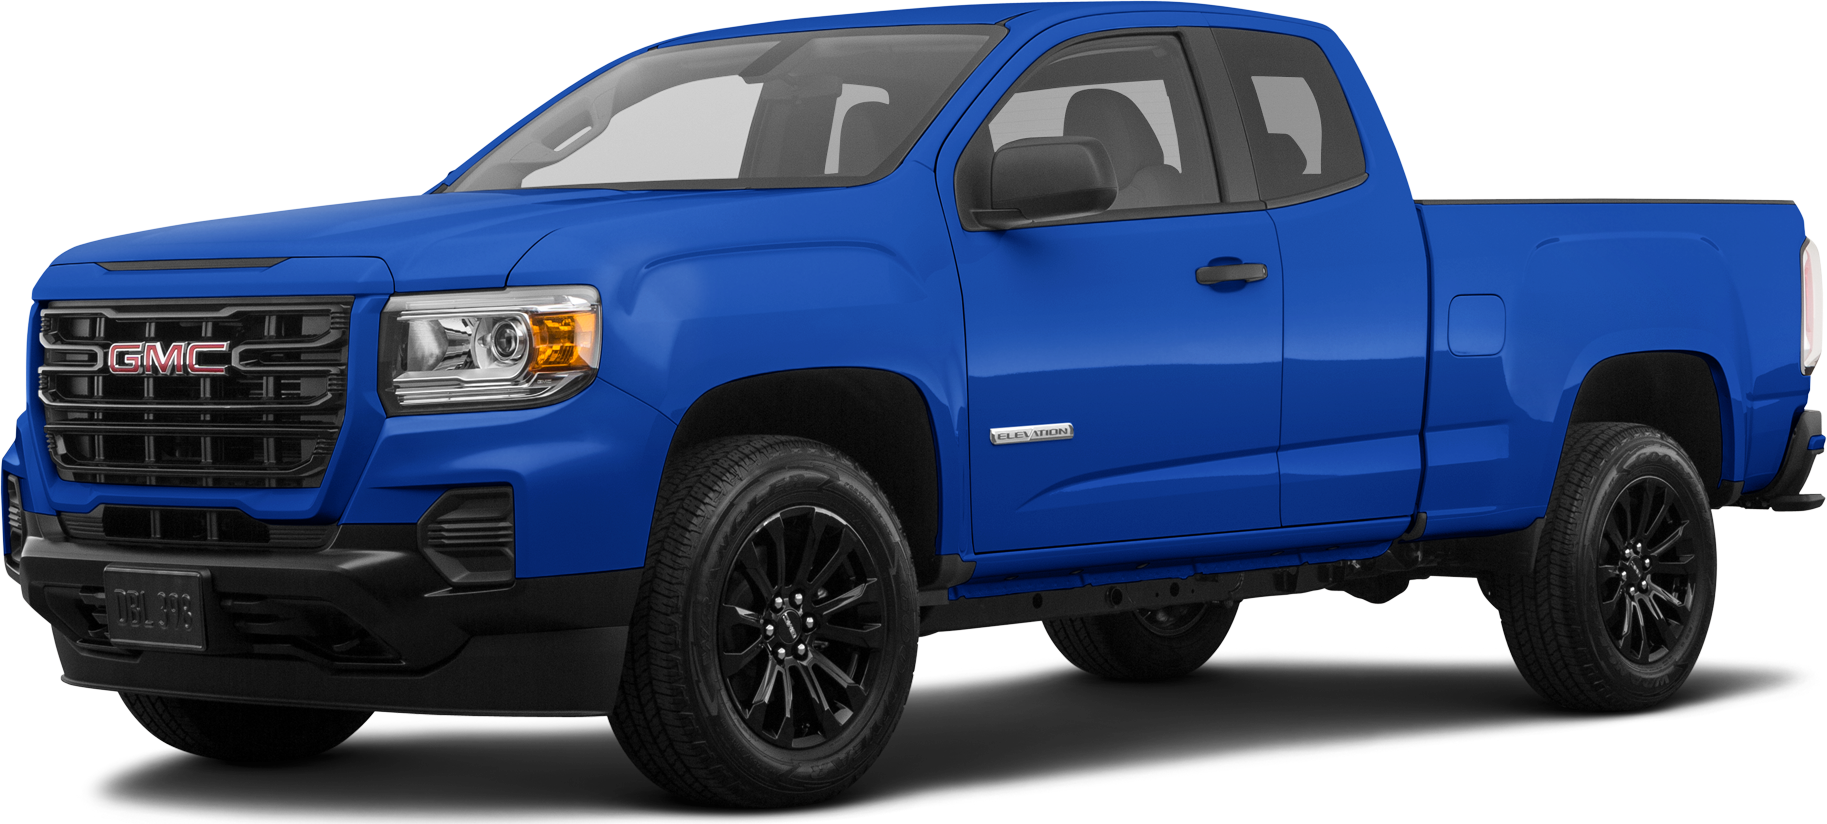 https://file.kelleybluebookimages.com/kbb/base/evox/CP/14666/2021-GMC-Canyon%20Extended%20Cab-front_14666_032_1827x824_GLT_cropped.png